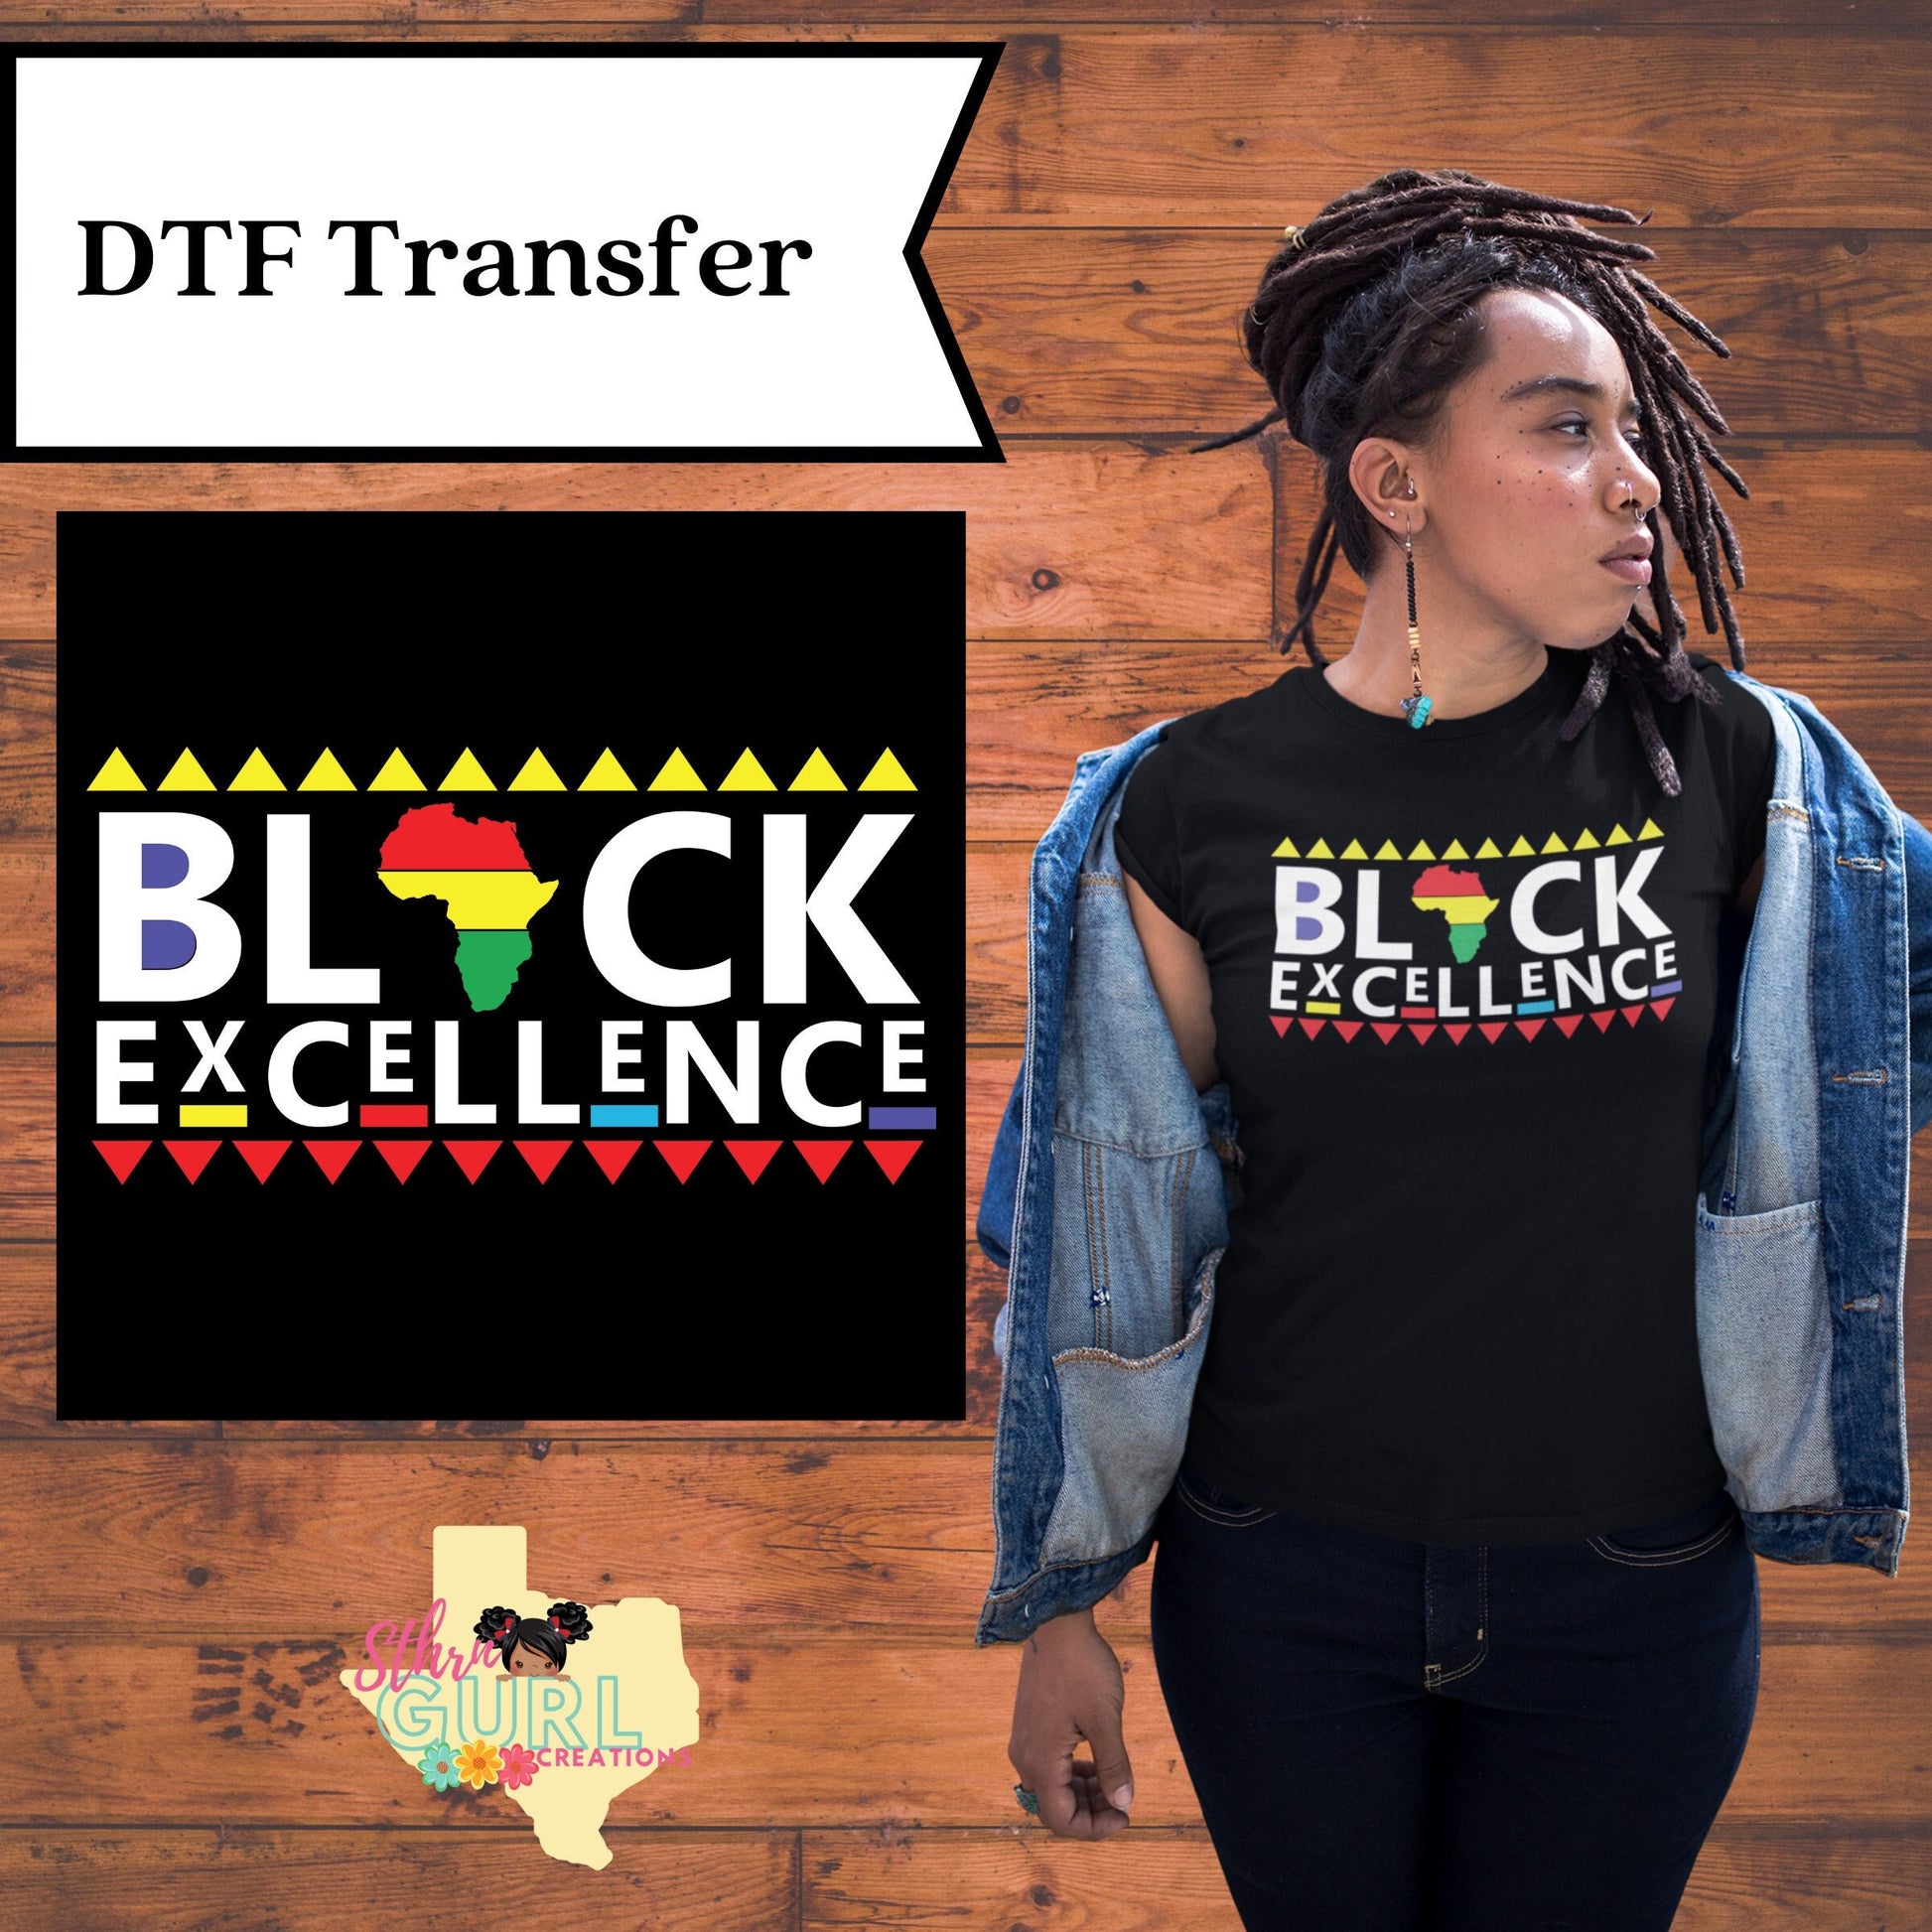 Black Excellence DTF Transfer, Black History Month T-Shirt, Juneteenth T-Shirt - SthrngurlCreations